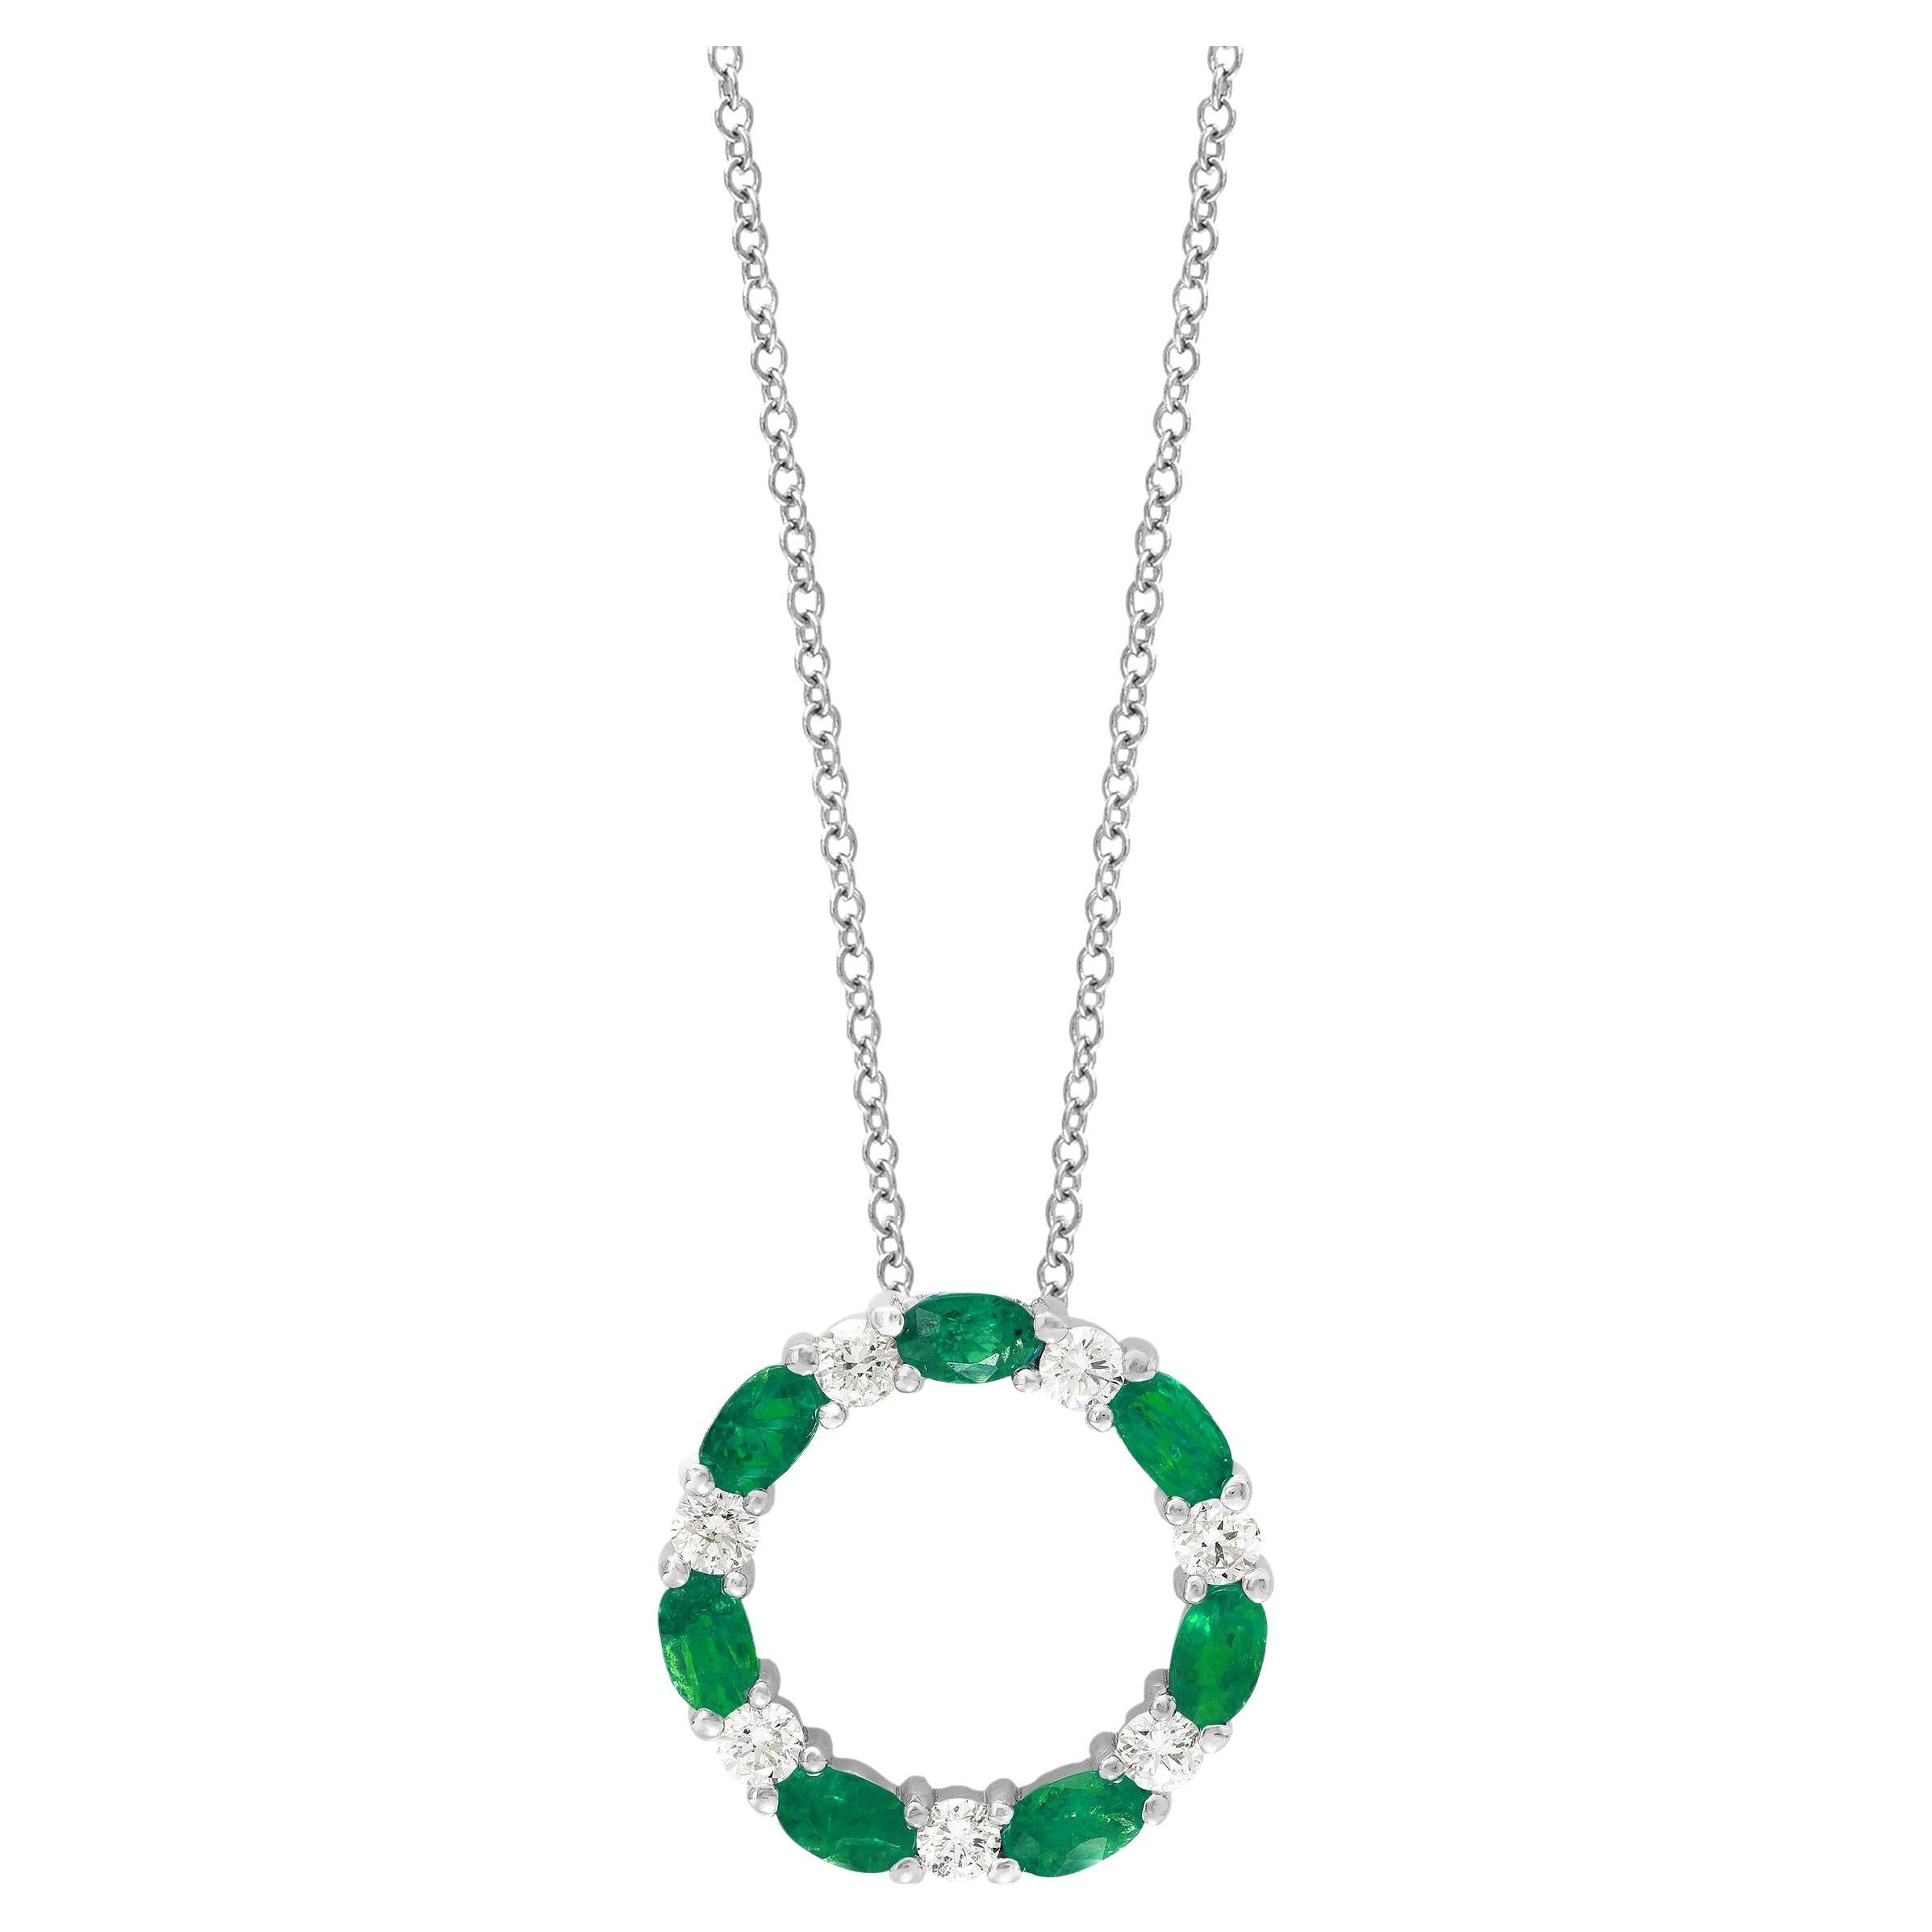 1.65 Carat Emerald and Diamond Circle Pendant Necklace in 14k White Gold